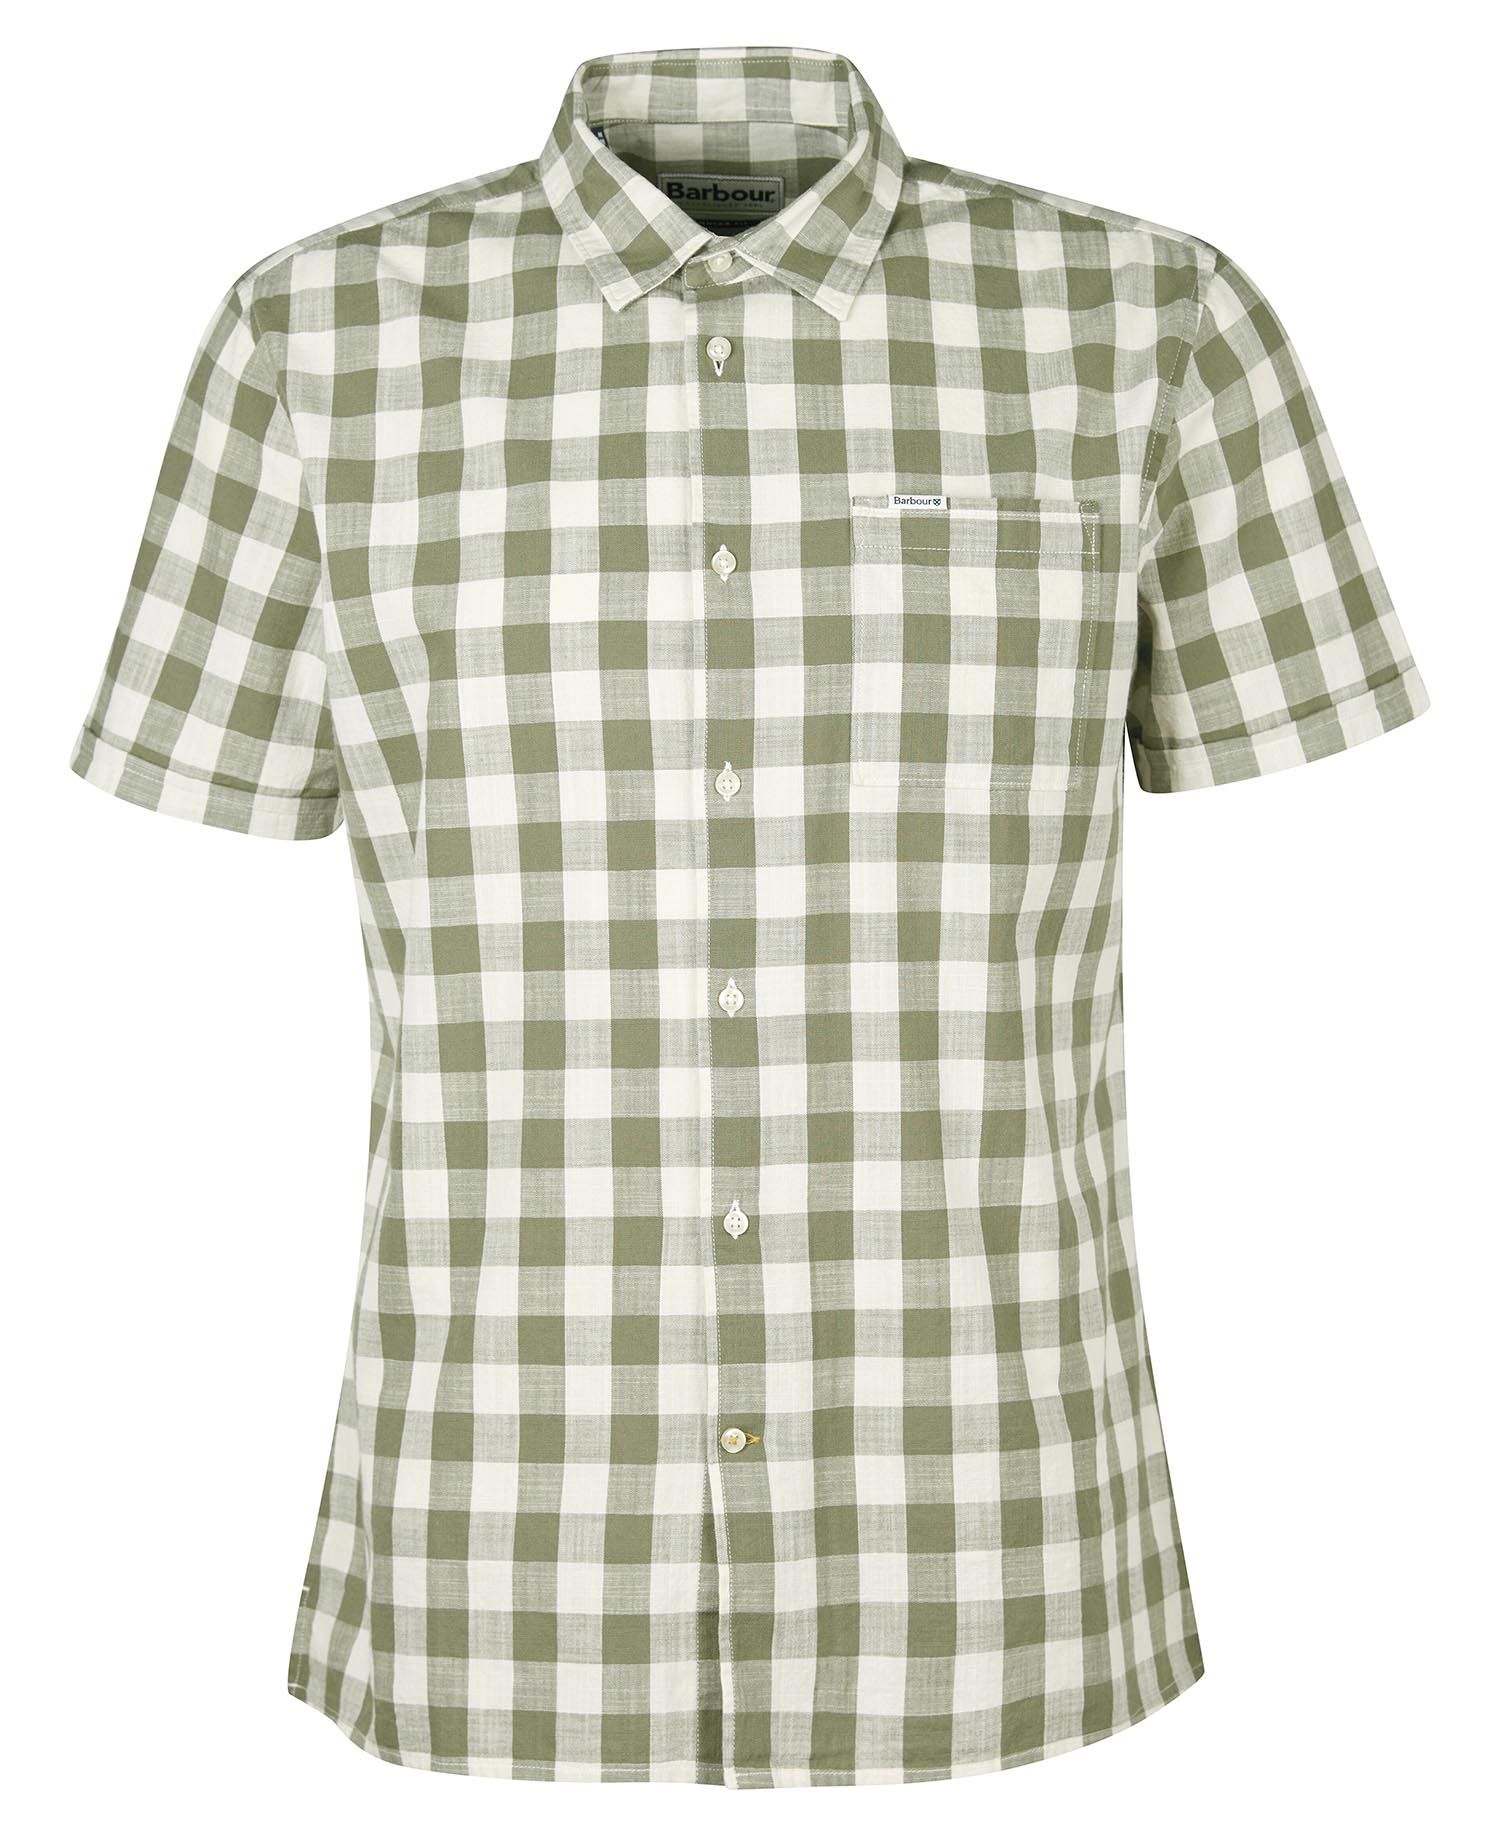 Barbour Hilson Tailored Shirt Olive